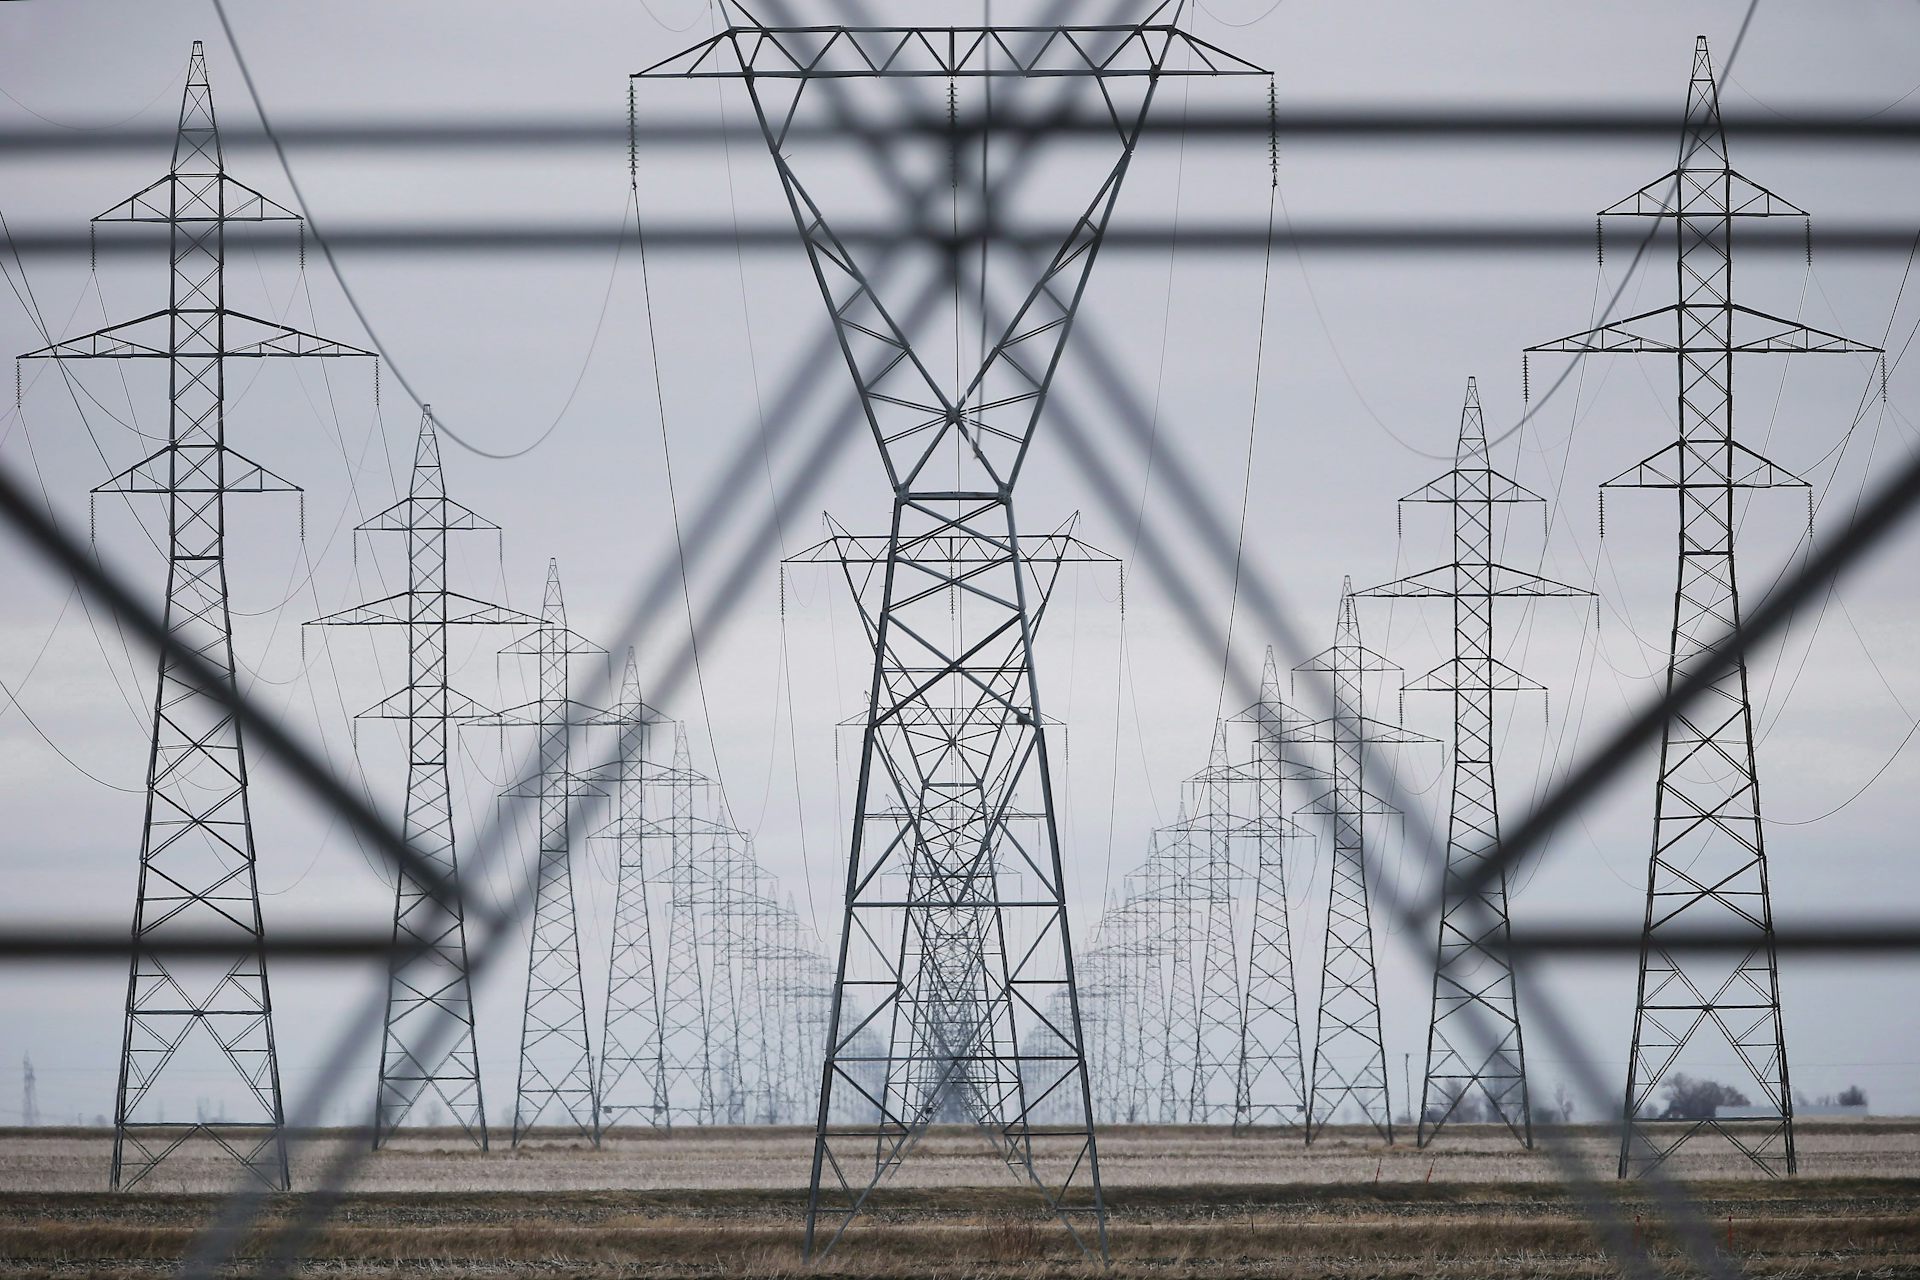 Electrical power grid towers